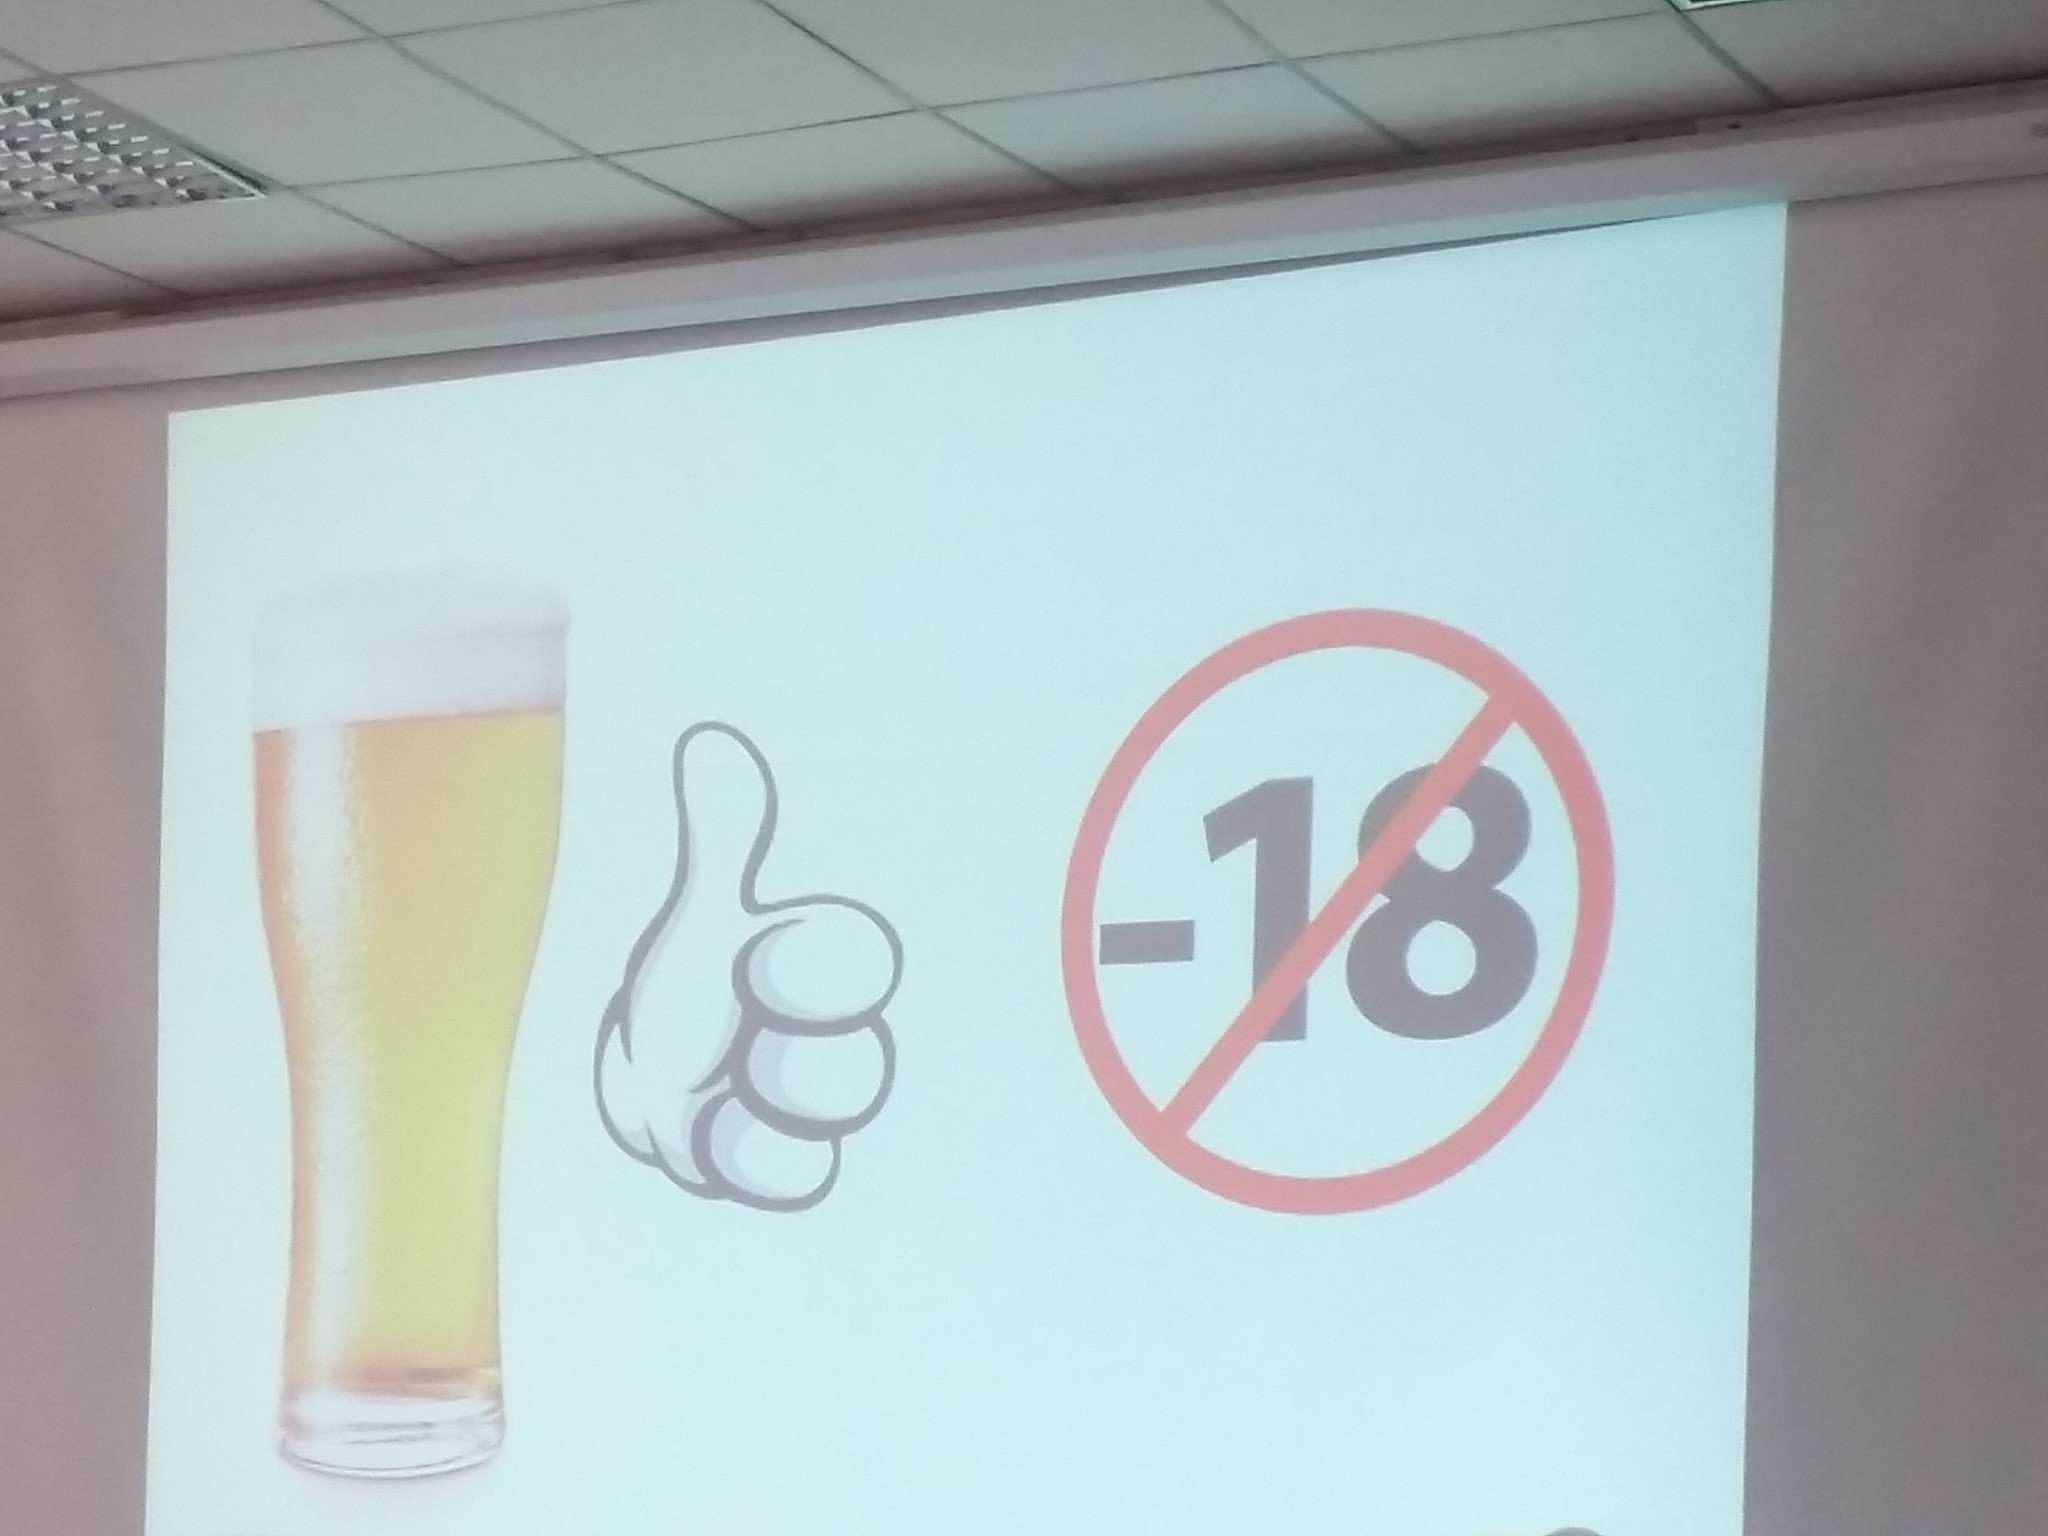 For Brarudi: “Yes to beer, but not to be served to the underage!”